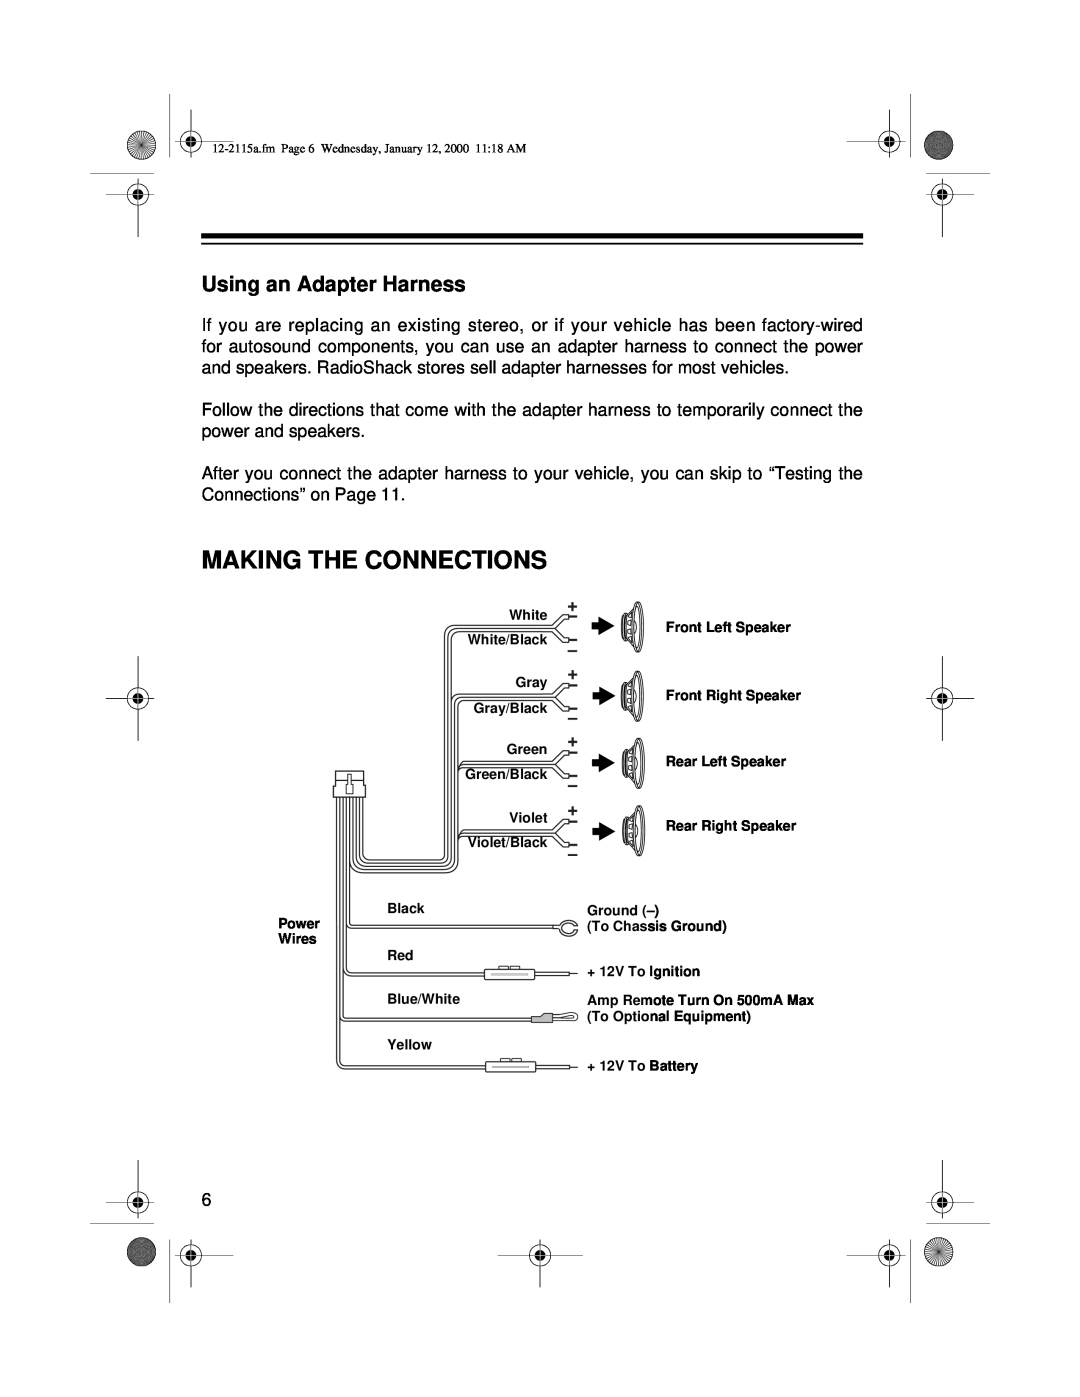 Radio Shack AM/FM Stereo Cassette owner manual Making The Connections, Using an Adapter Harness 